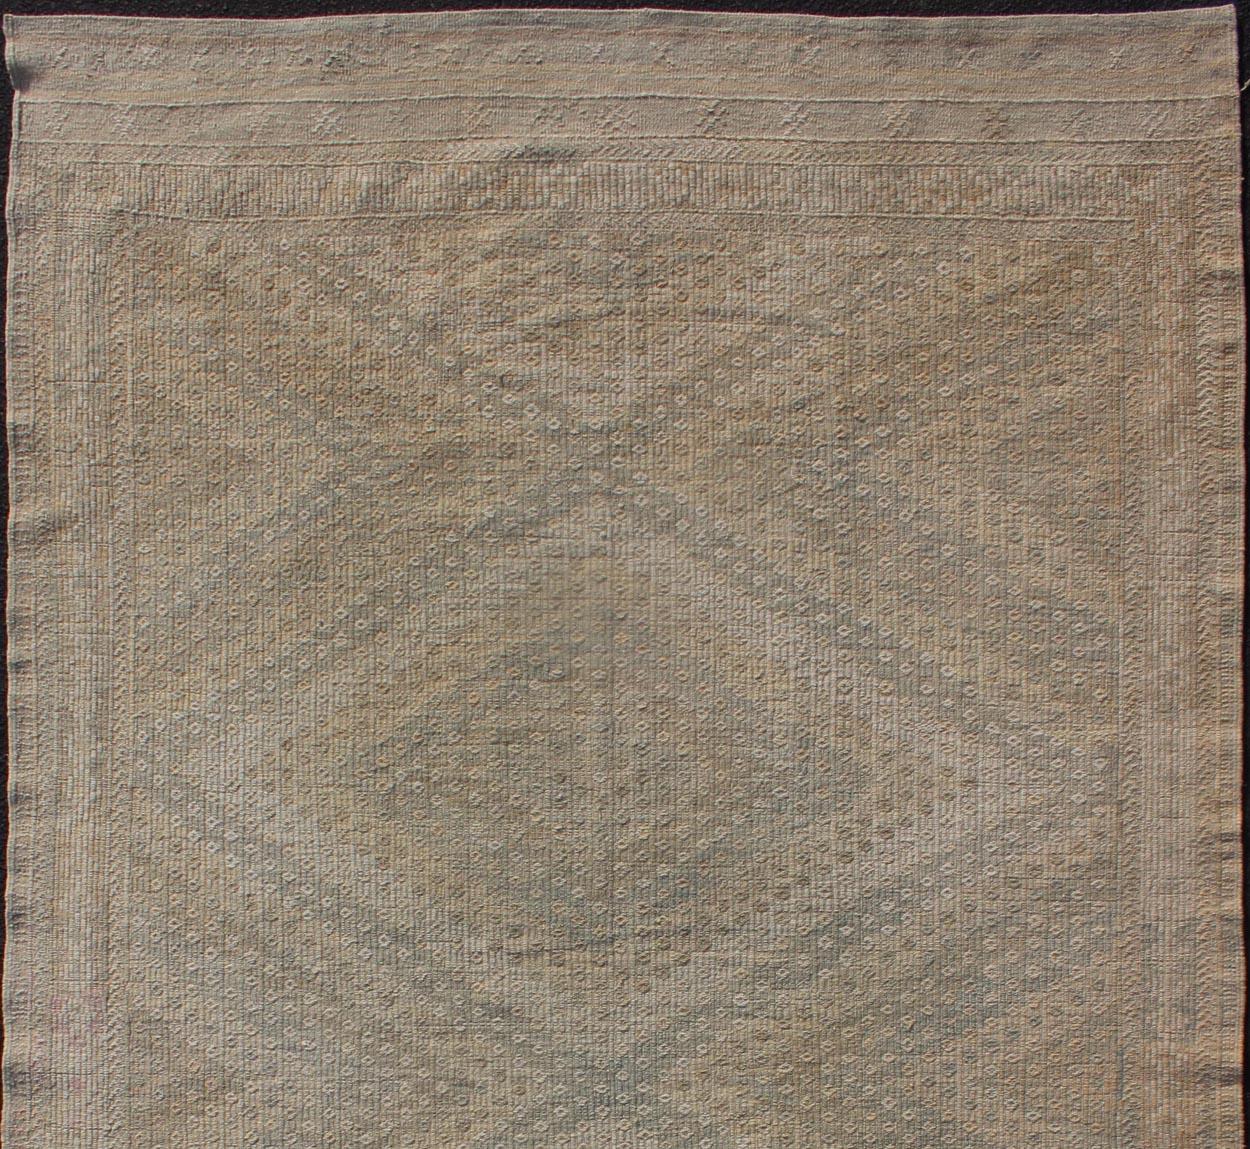 Embroidered vintage Kilim rug from Turkey in shades of tan, light blue and light yellow with geometric pattern, rug EN-179665, country of origin / type: Turkey / Kilim, circa 1950.

Measures: 5'5 x 9'6 

This geometric Kilim from Turkey bears a